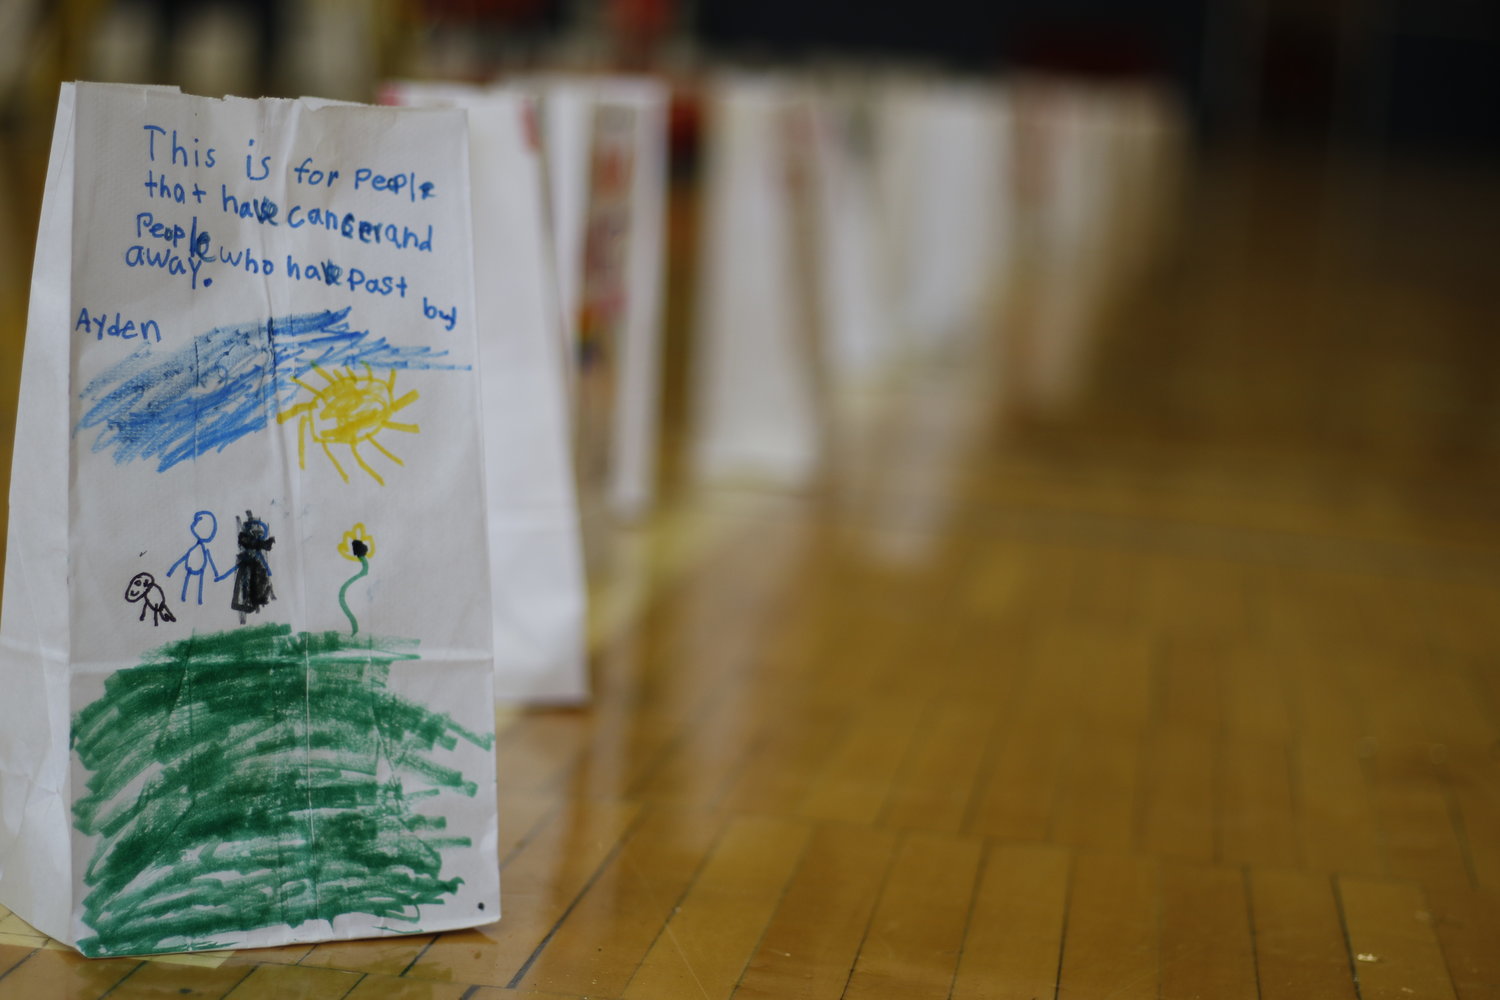 Like last year, participants will make luminaria bags and dedicate them to those who have been affected by cancer.